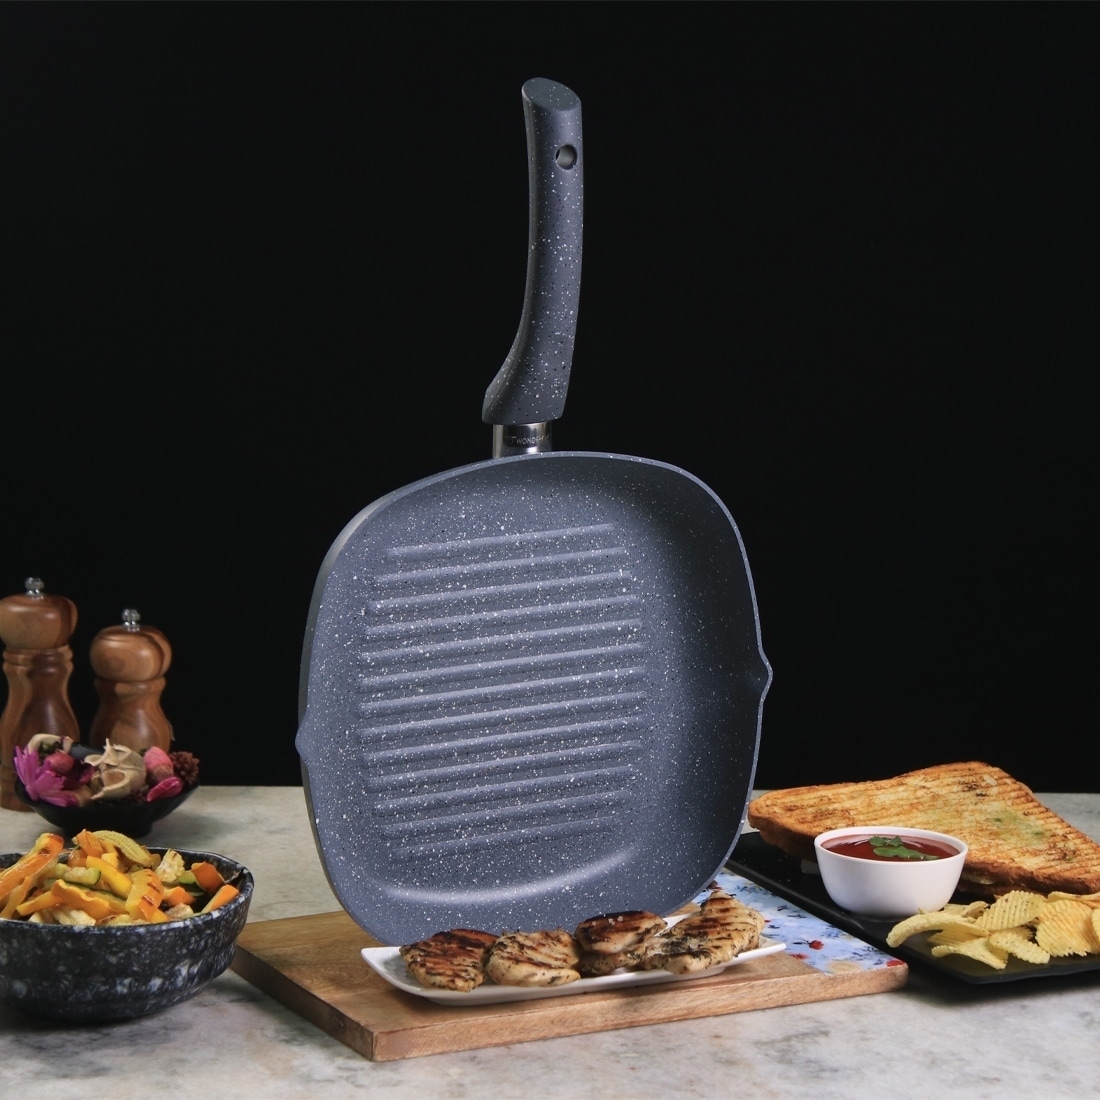 https://ak1.ostkcdn.com/images/products/30794408/Wonderchef-Granite-Forged-Non-Stick-and-PFOA-Free-Aluminum-Indian-Cooking-Grill-Pan-24cm-Gray-79c5a259-b309-48d3-a6e4-afbd08dce24d.jpg